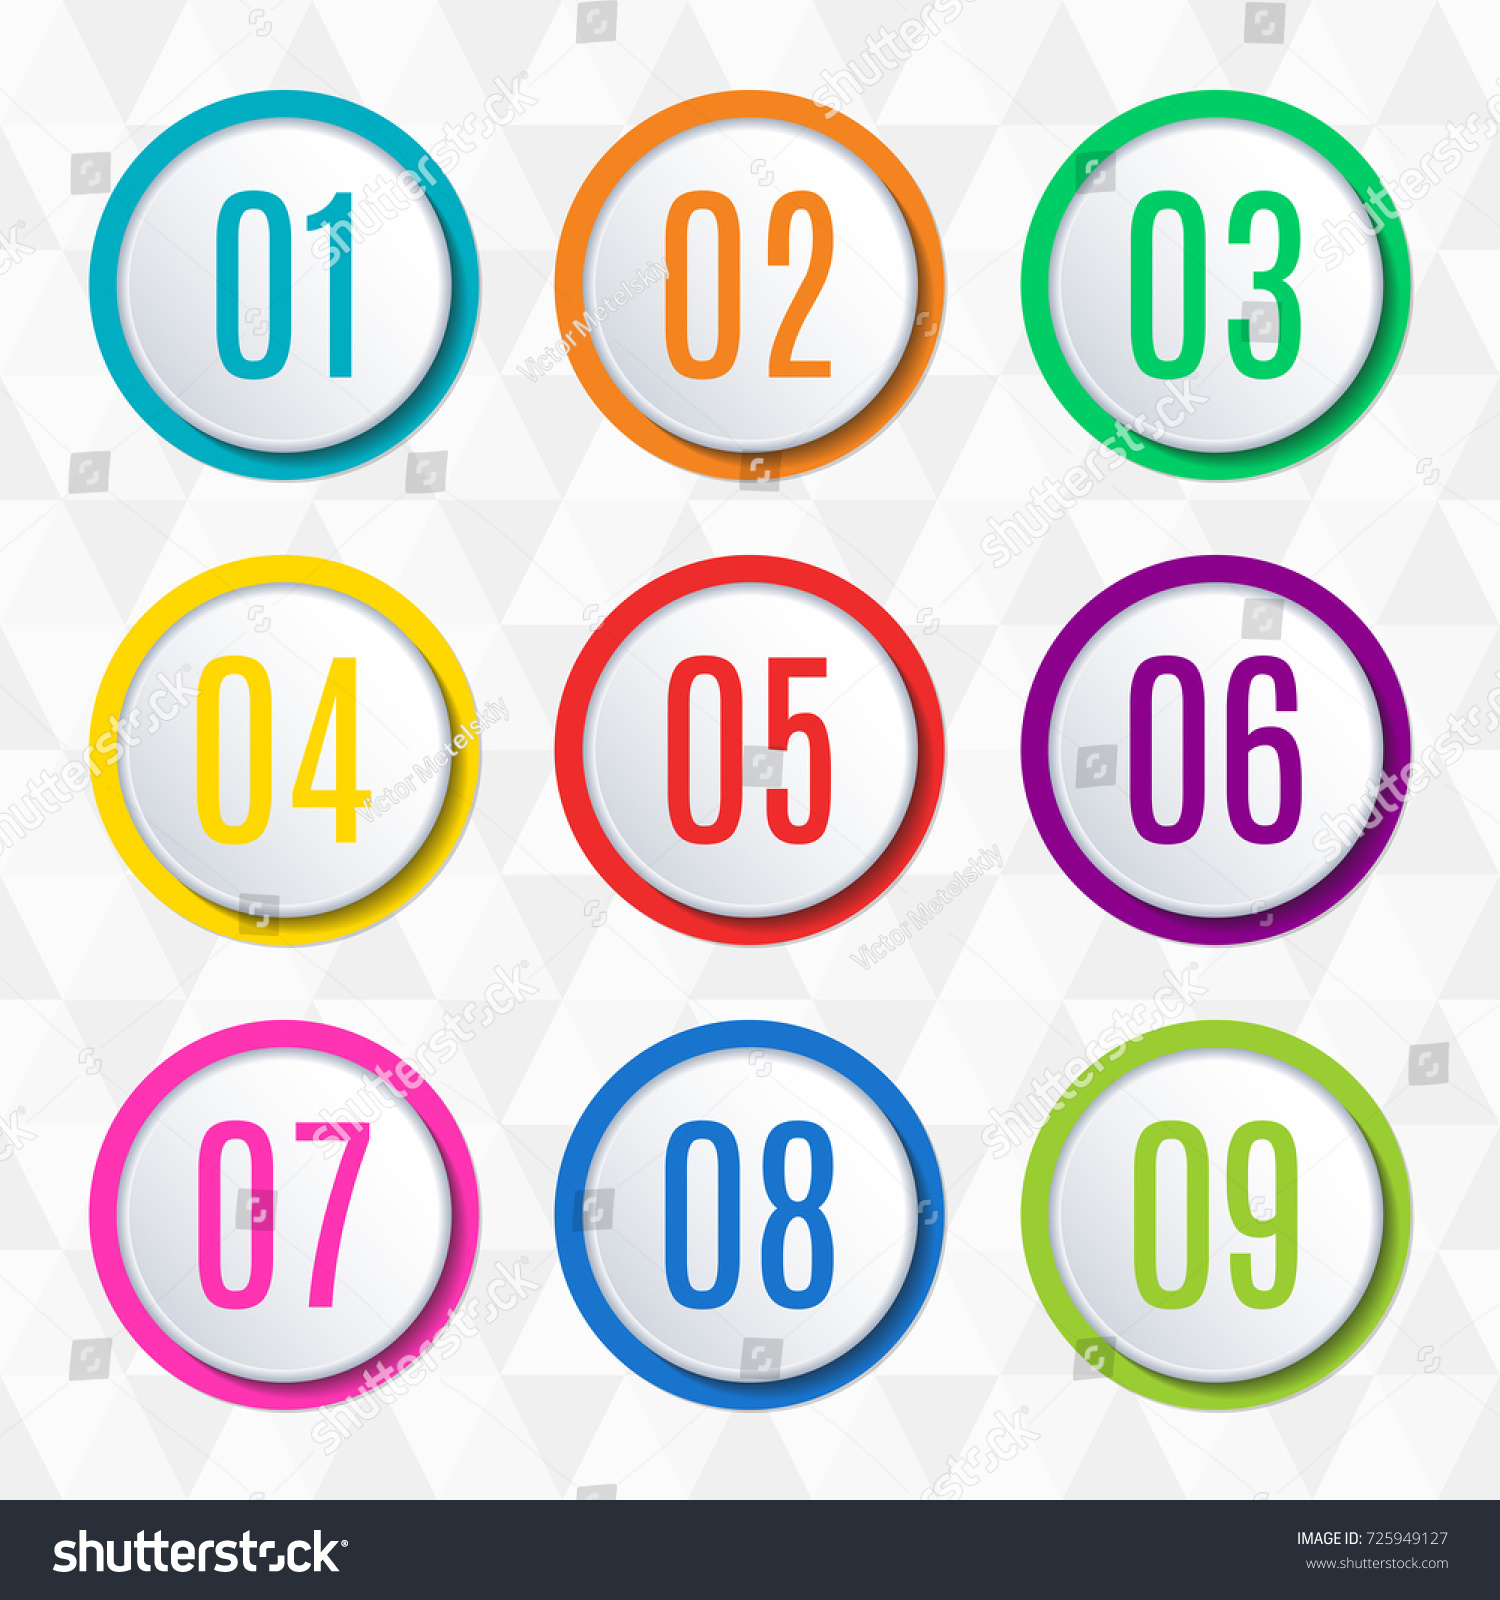 Round Buttons Badges Numbers 123456789 Button Stock Vector (Royalty ...